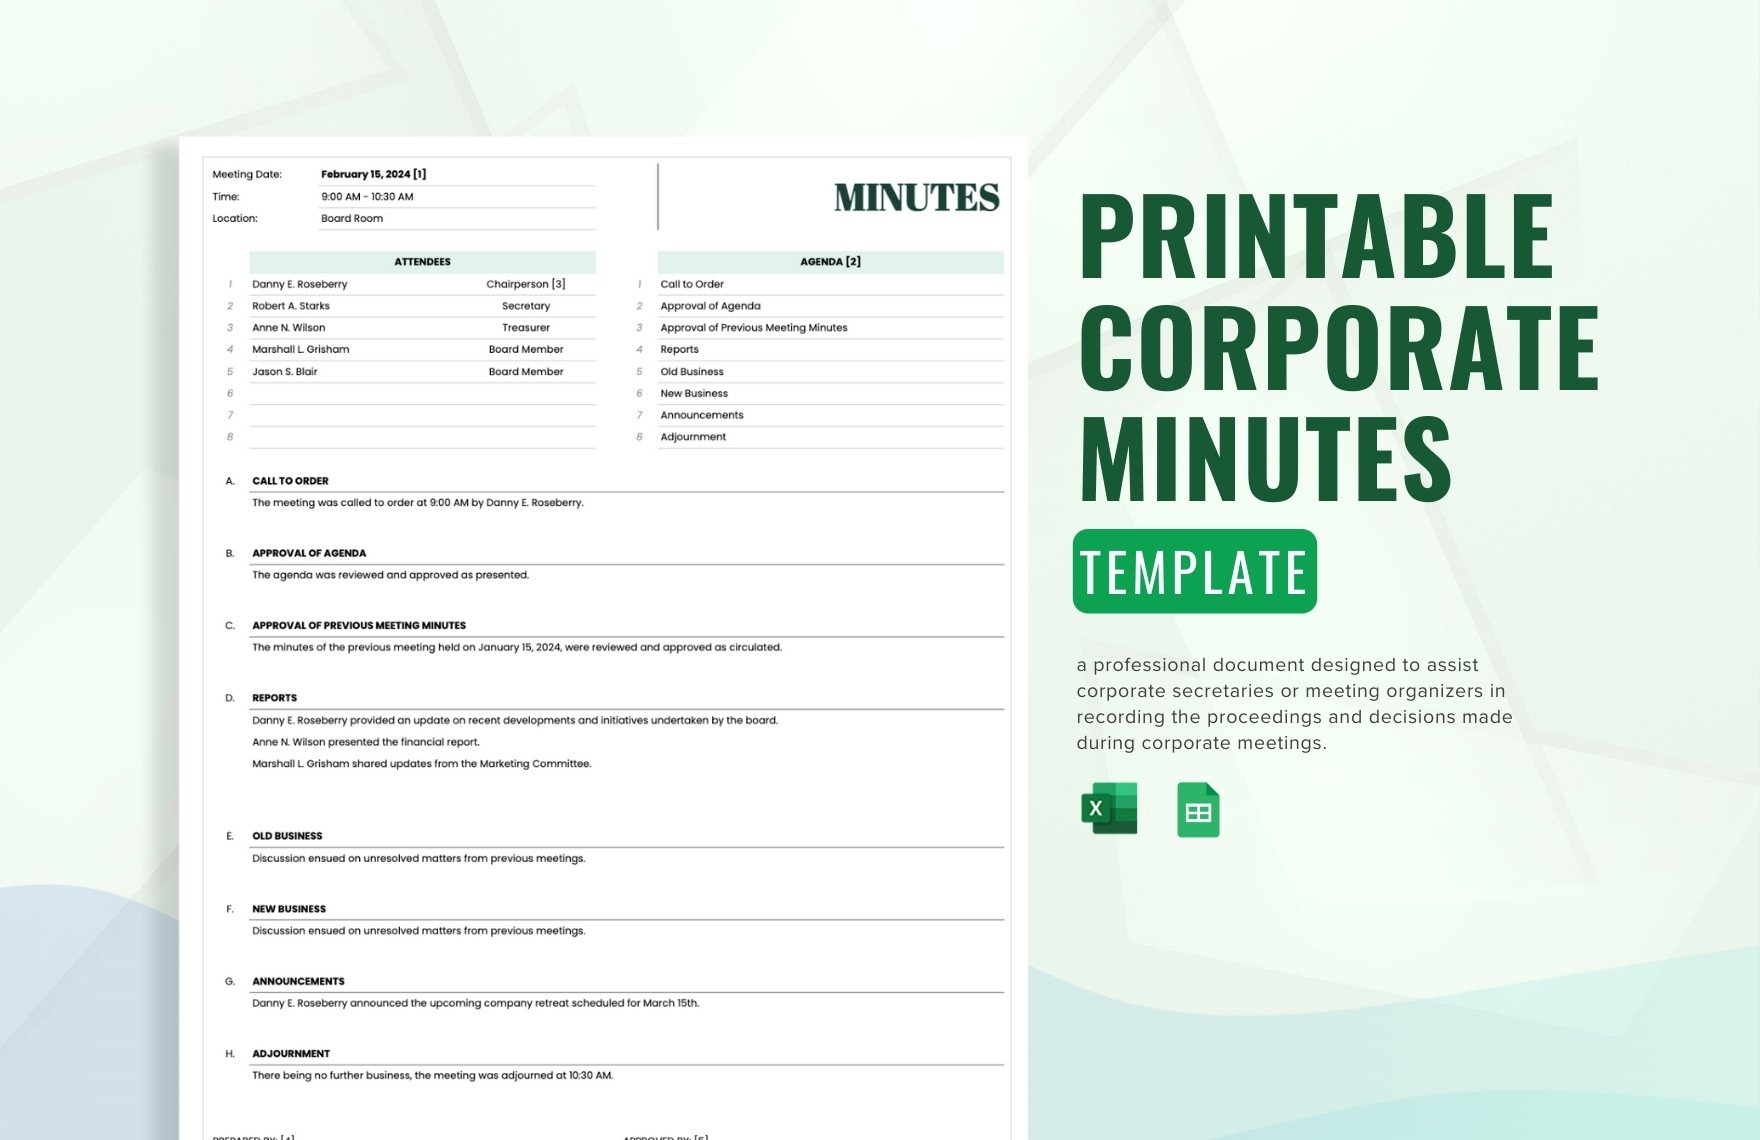 Printable Corporate Minutes Template in Excel, Google Sheets